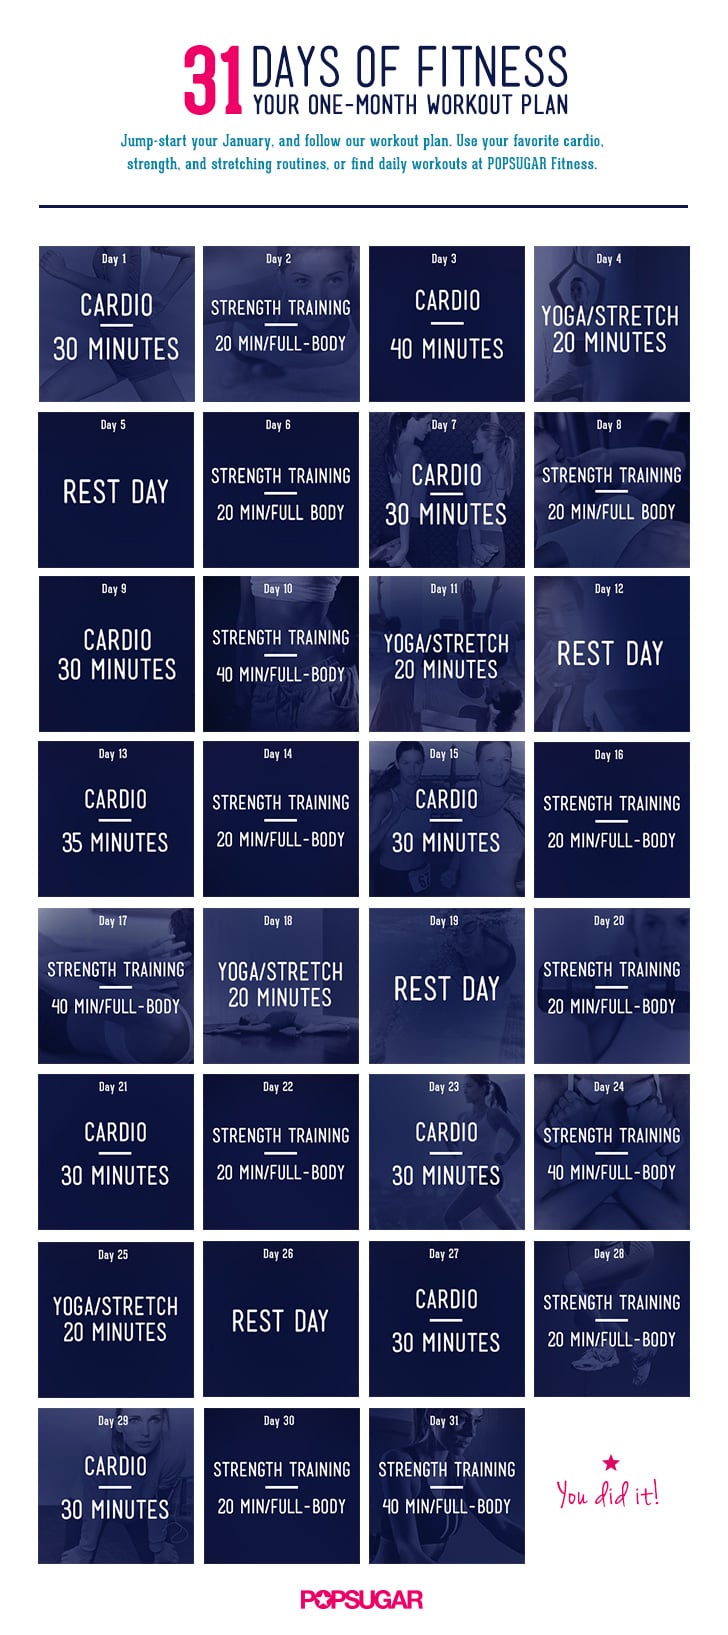 Rest Day Workouts and Workout Calendar